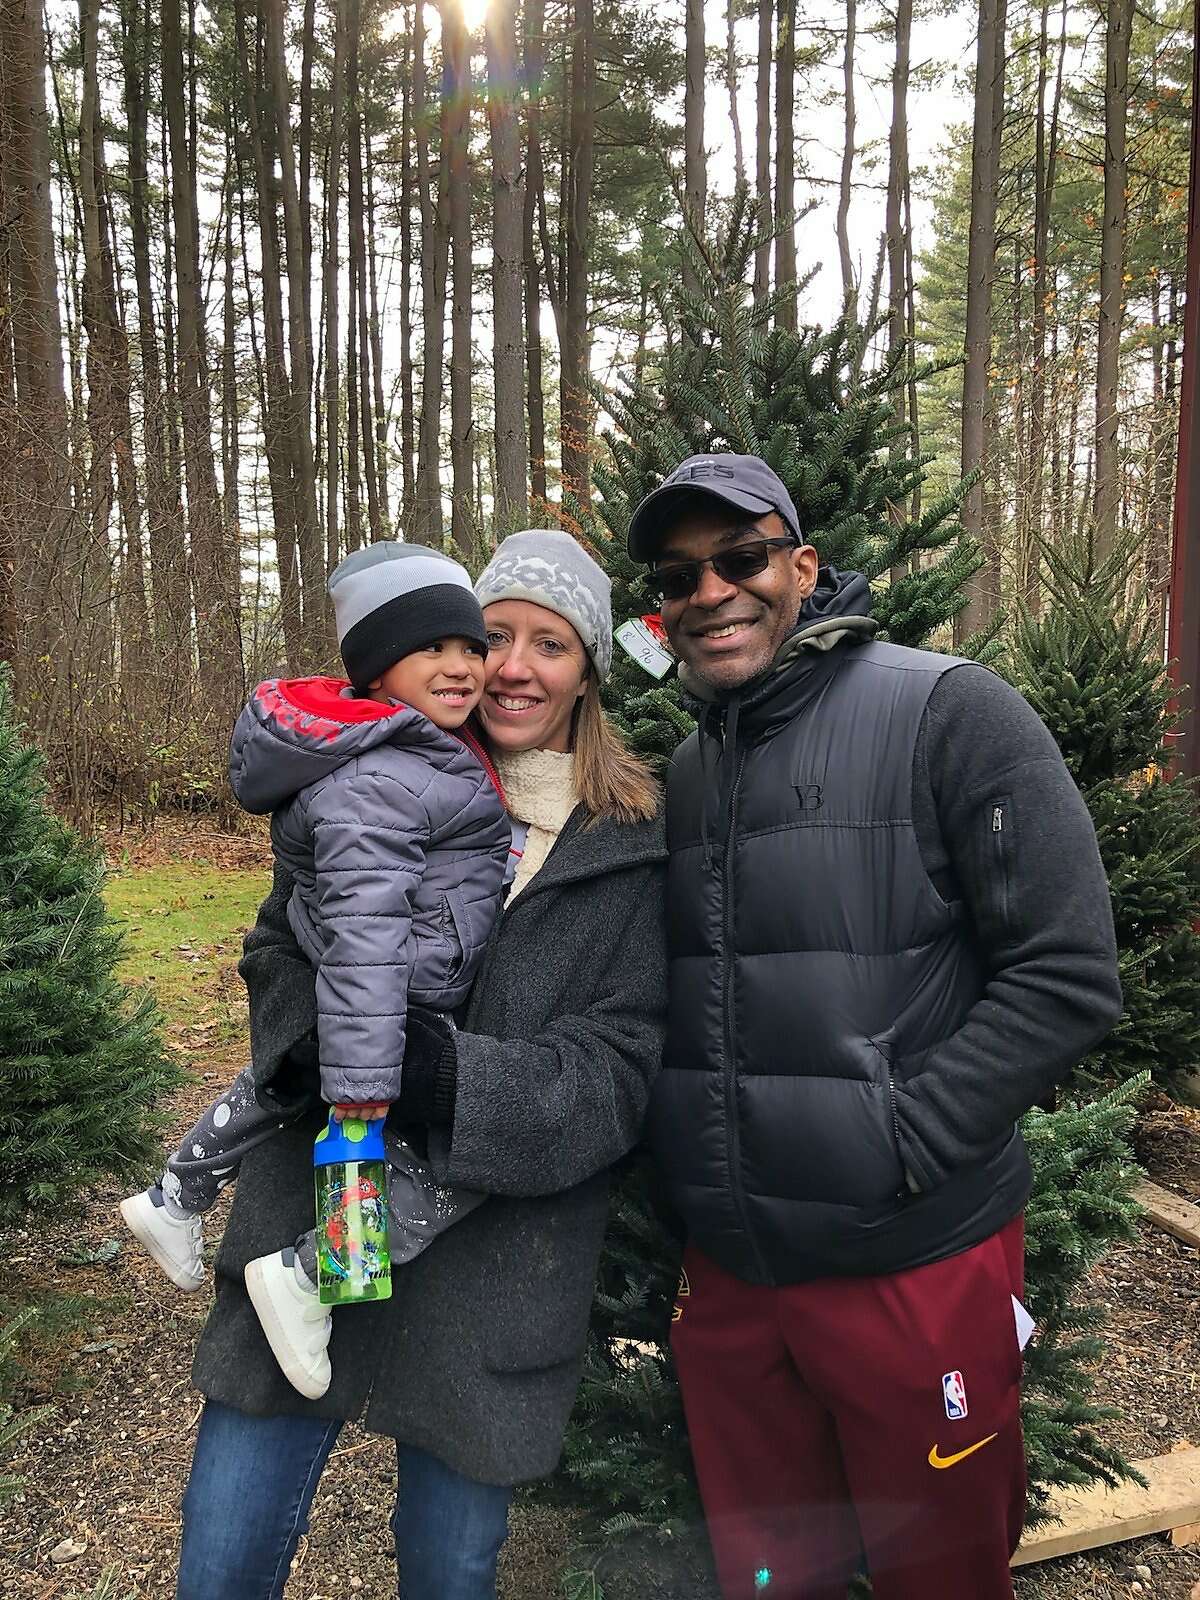 Cleveland Cavs Assistant Coach Lindsay Gottlieb with her husband Patrick Martin and her son Jordan on November 30, 2019.